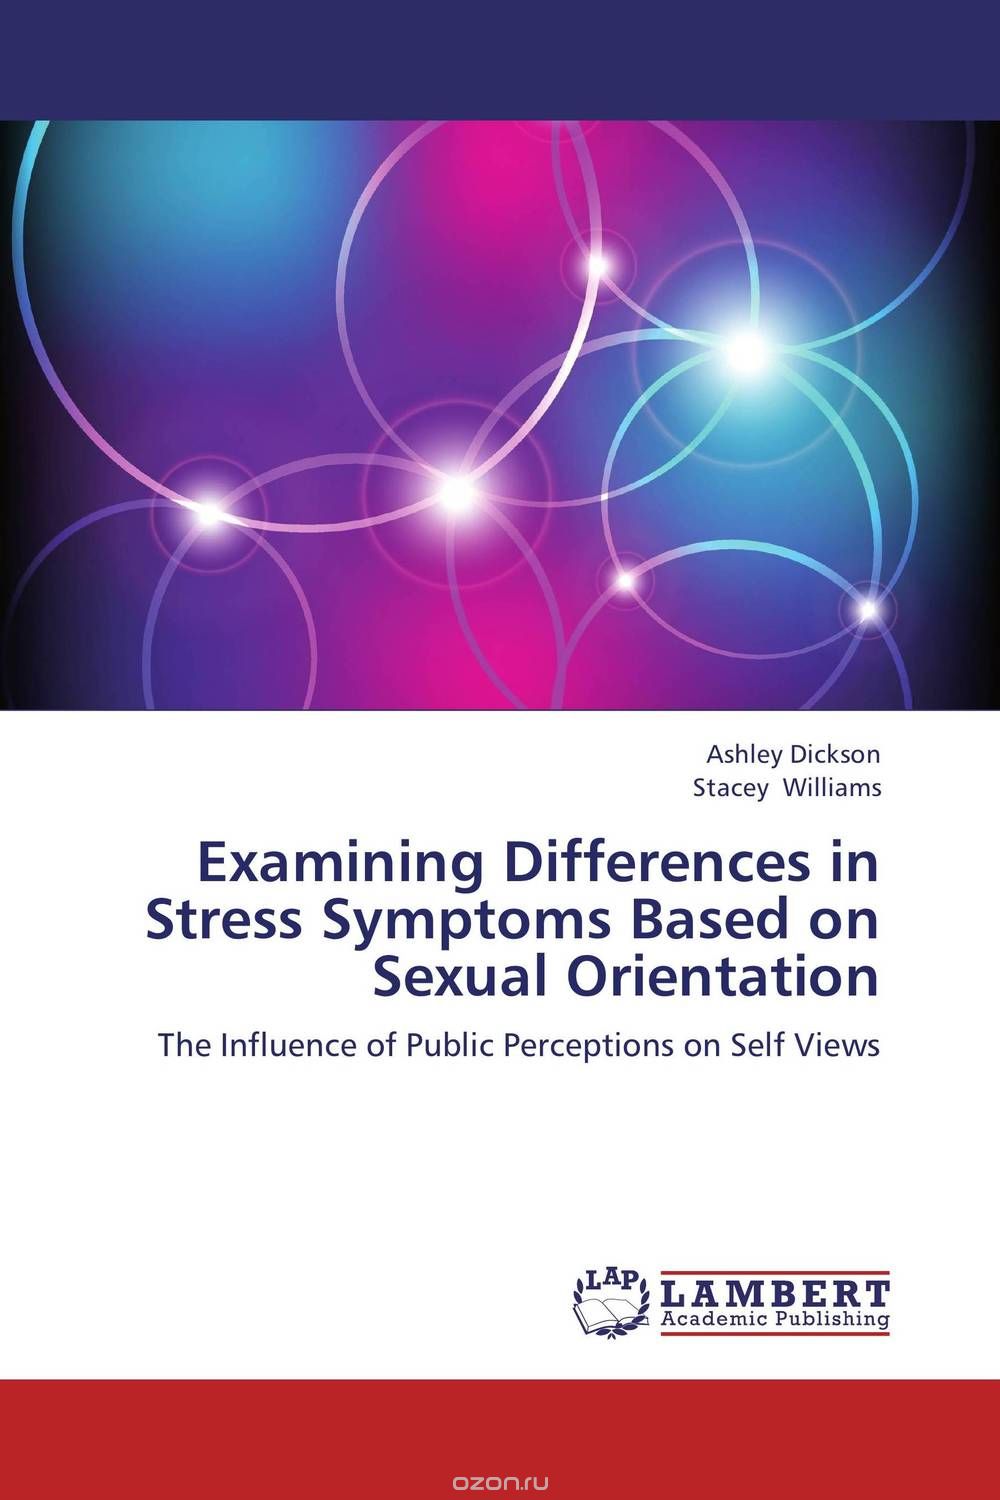 Examining Differences in Stress Symptoms Based on Sexual Orientation